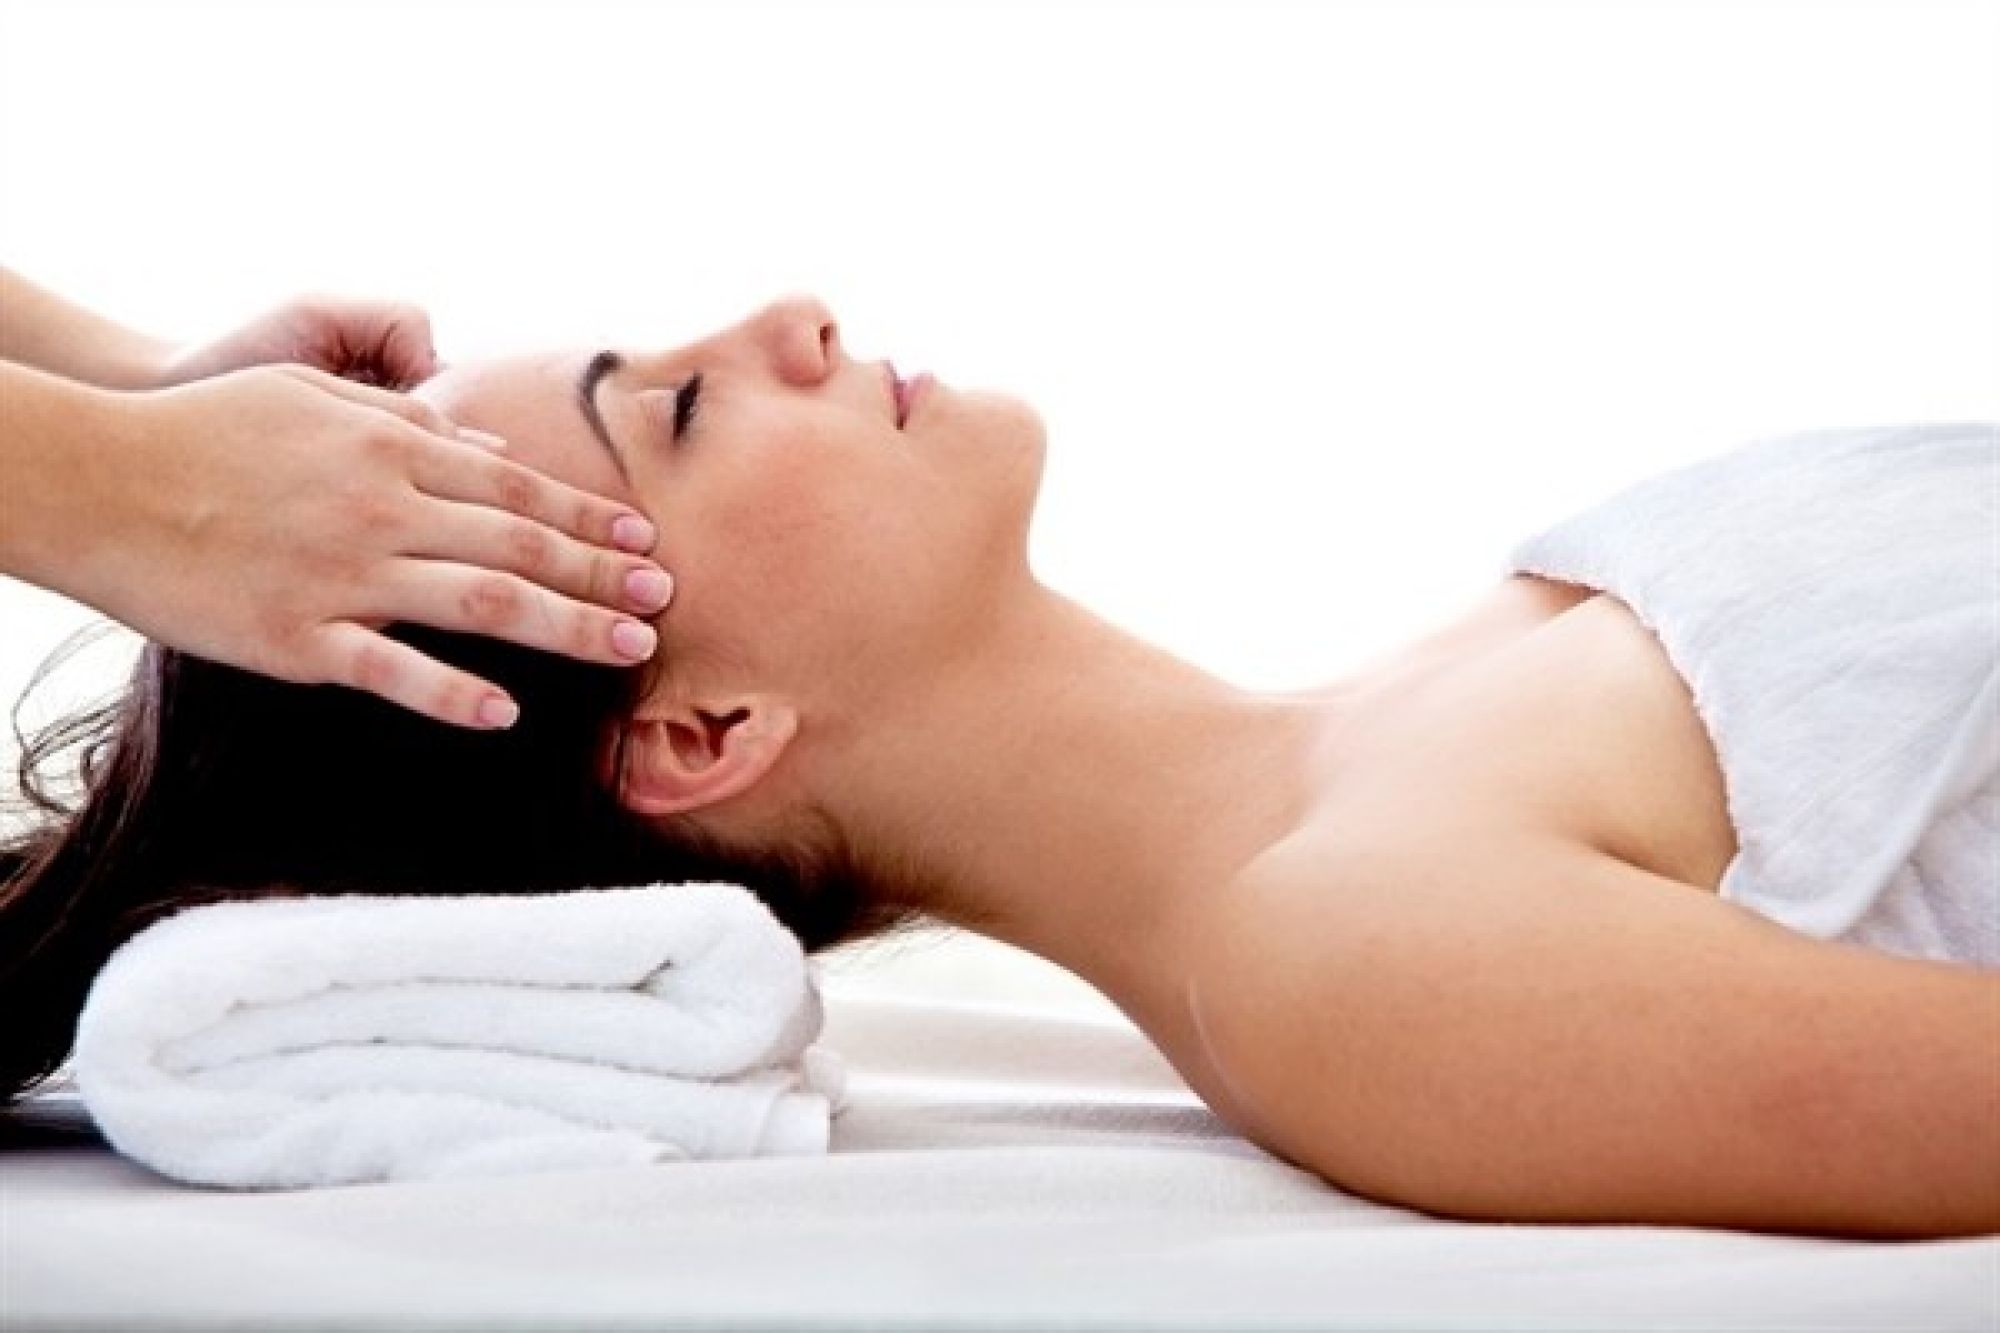 massage-therapists-help-address-stress-and-other-physical-conditions